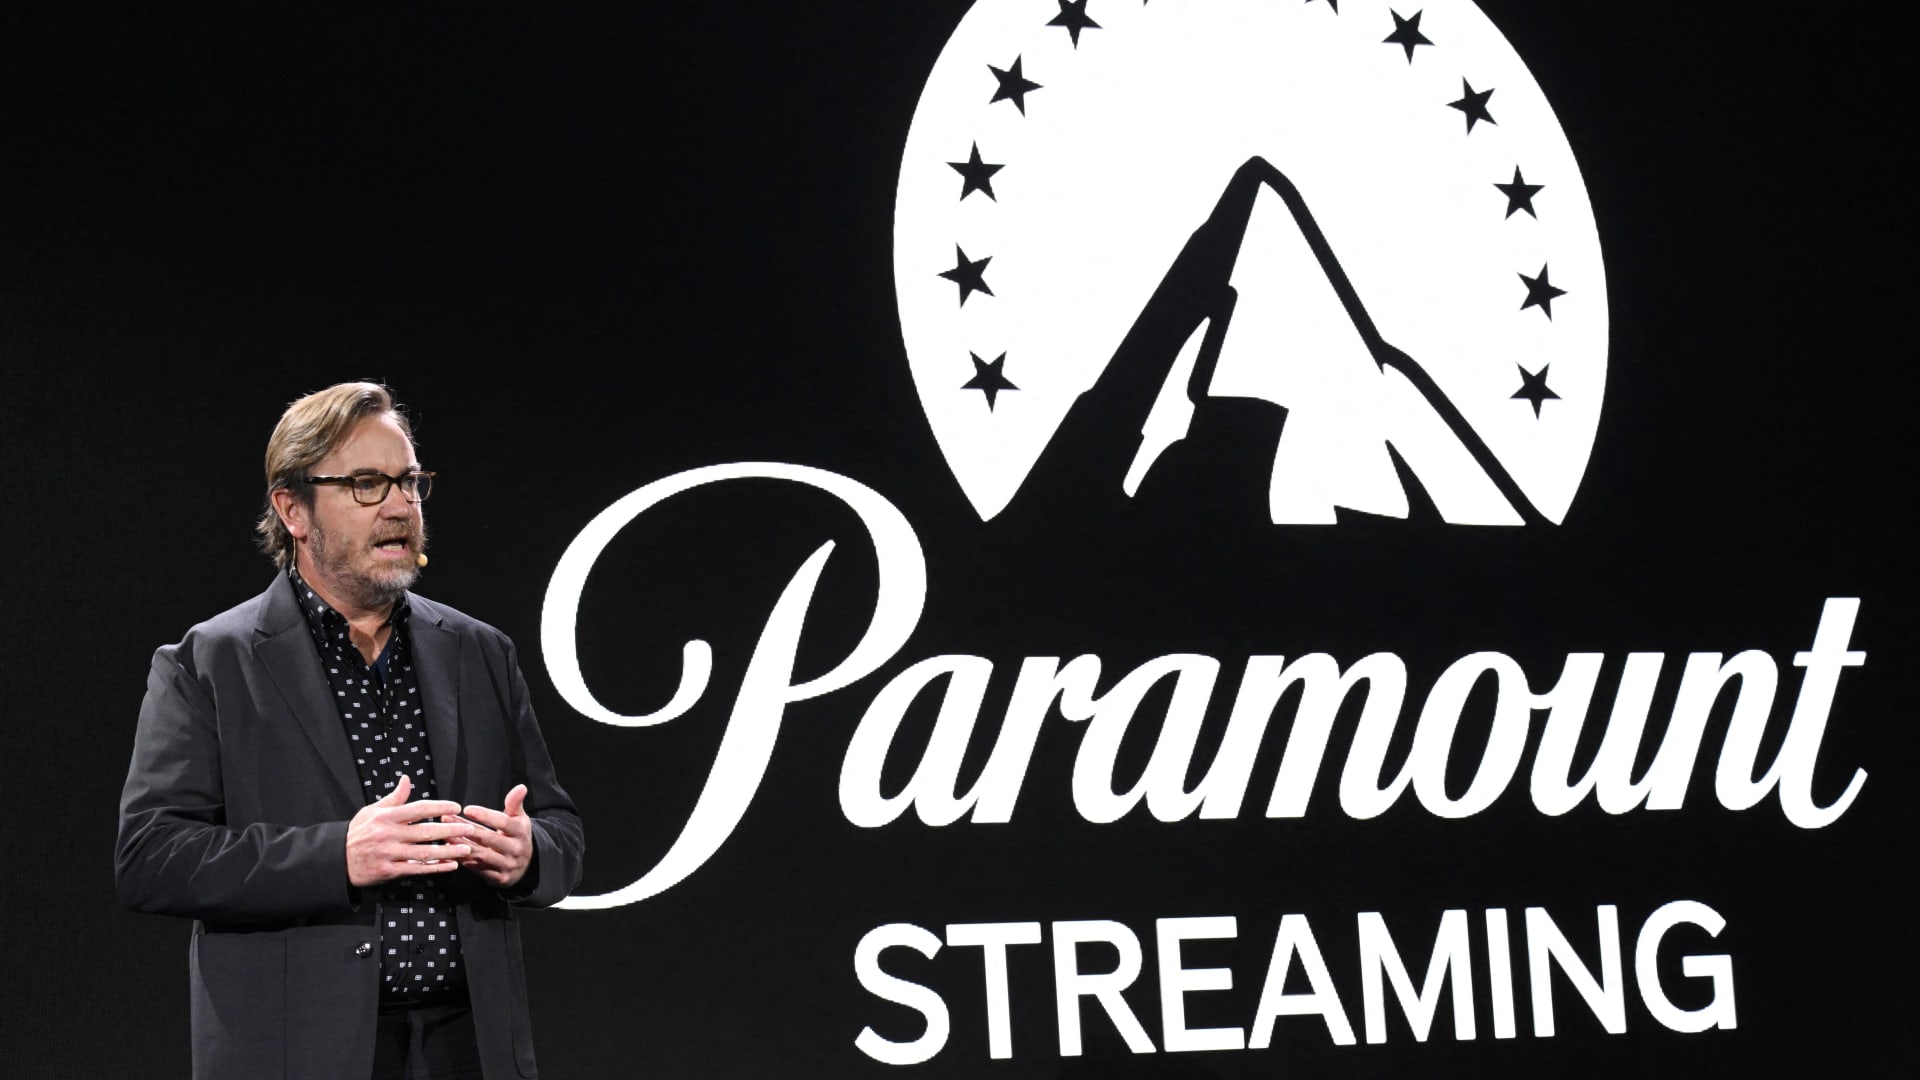 Paramount streaming service to merge with Showtime June 27